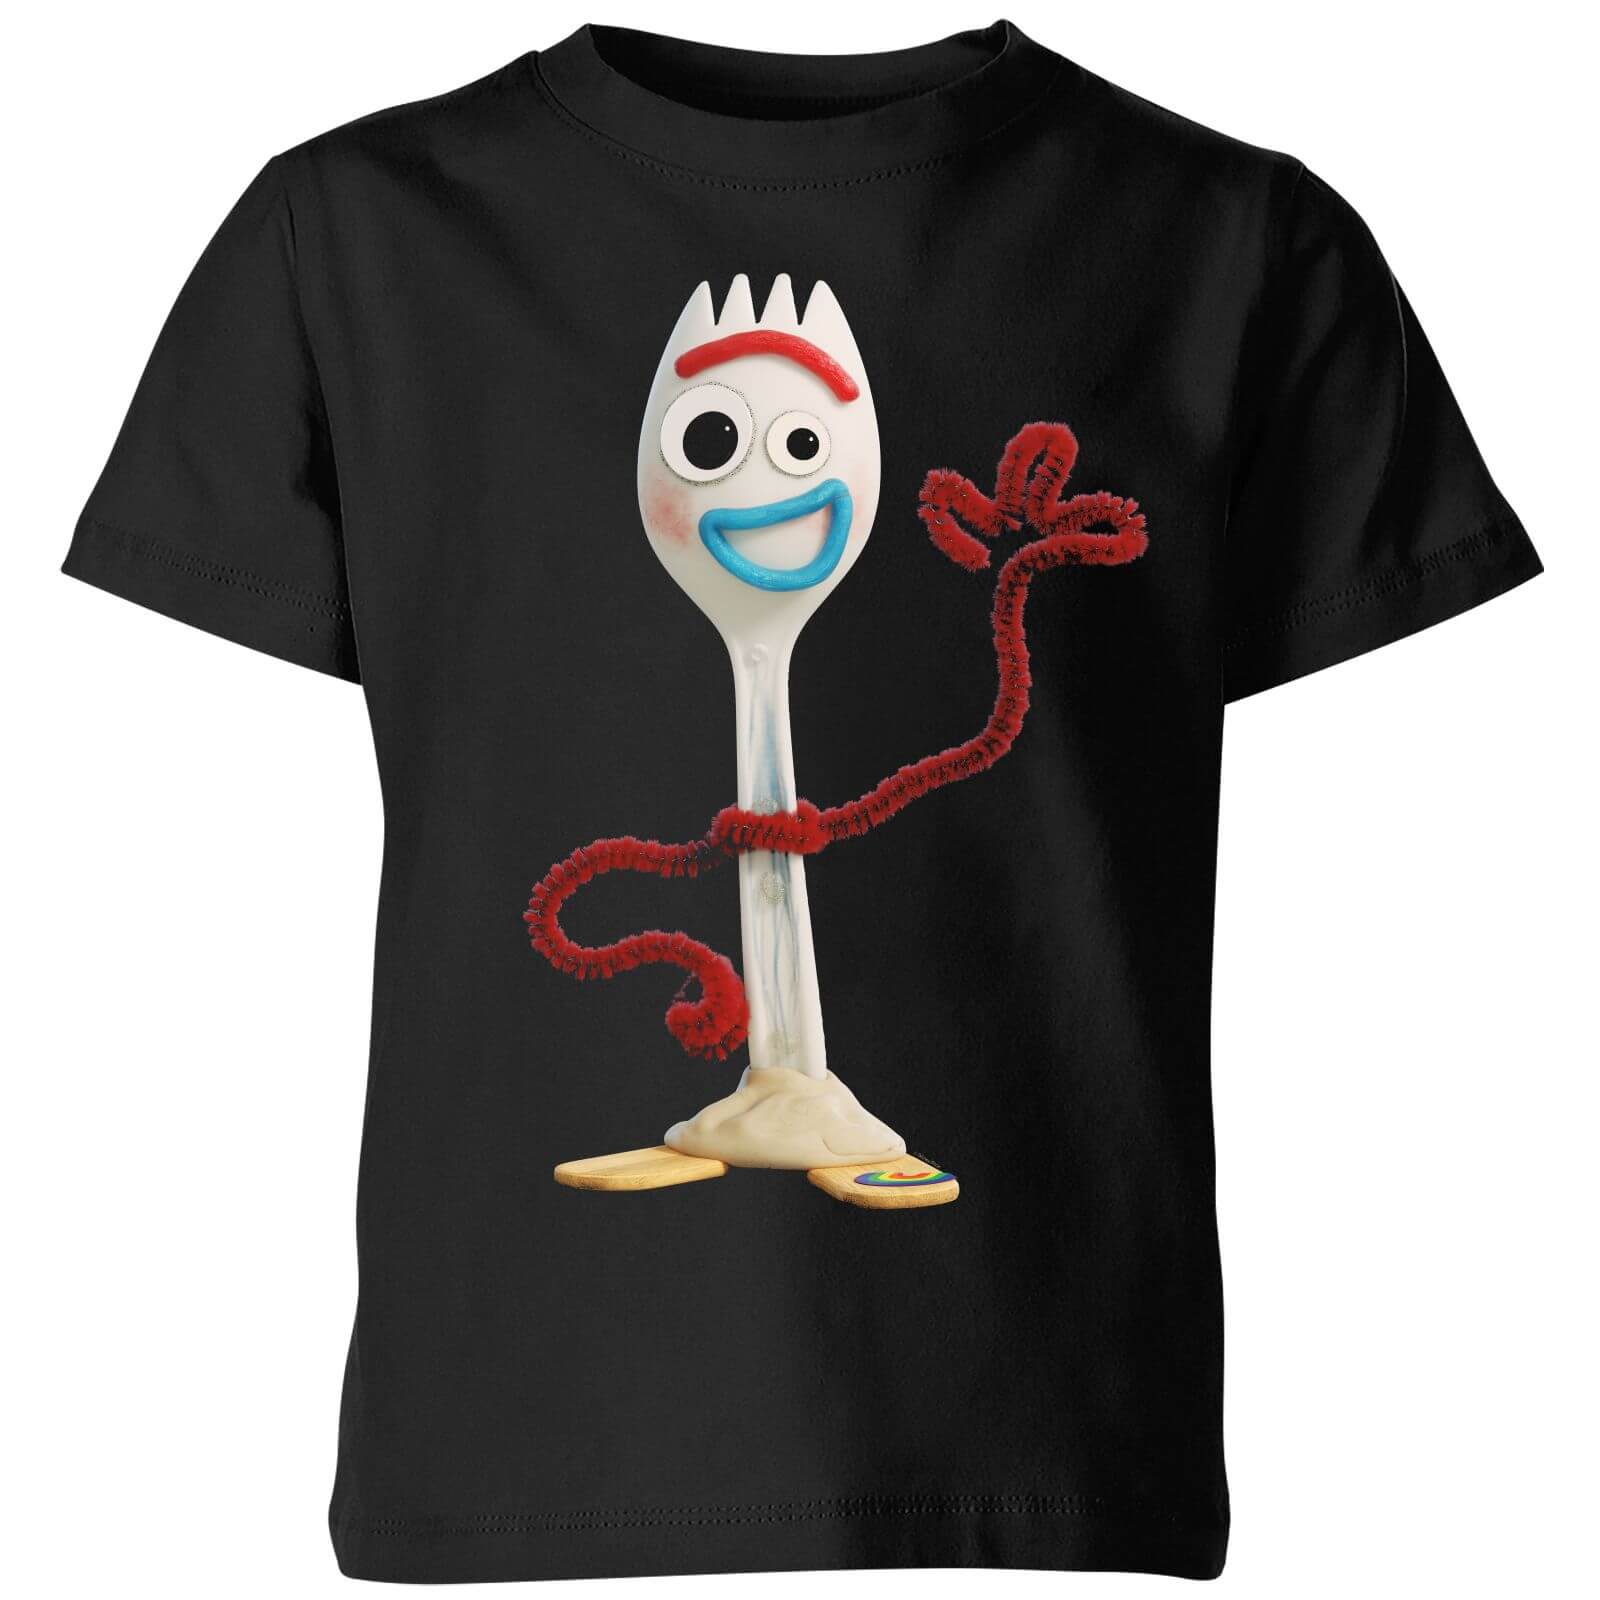 Toy Story 4 Forky Kids' T-Shirt - Black - 7-8 Years